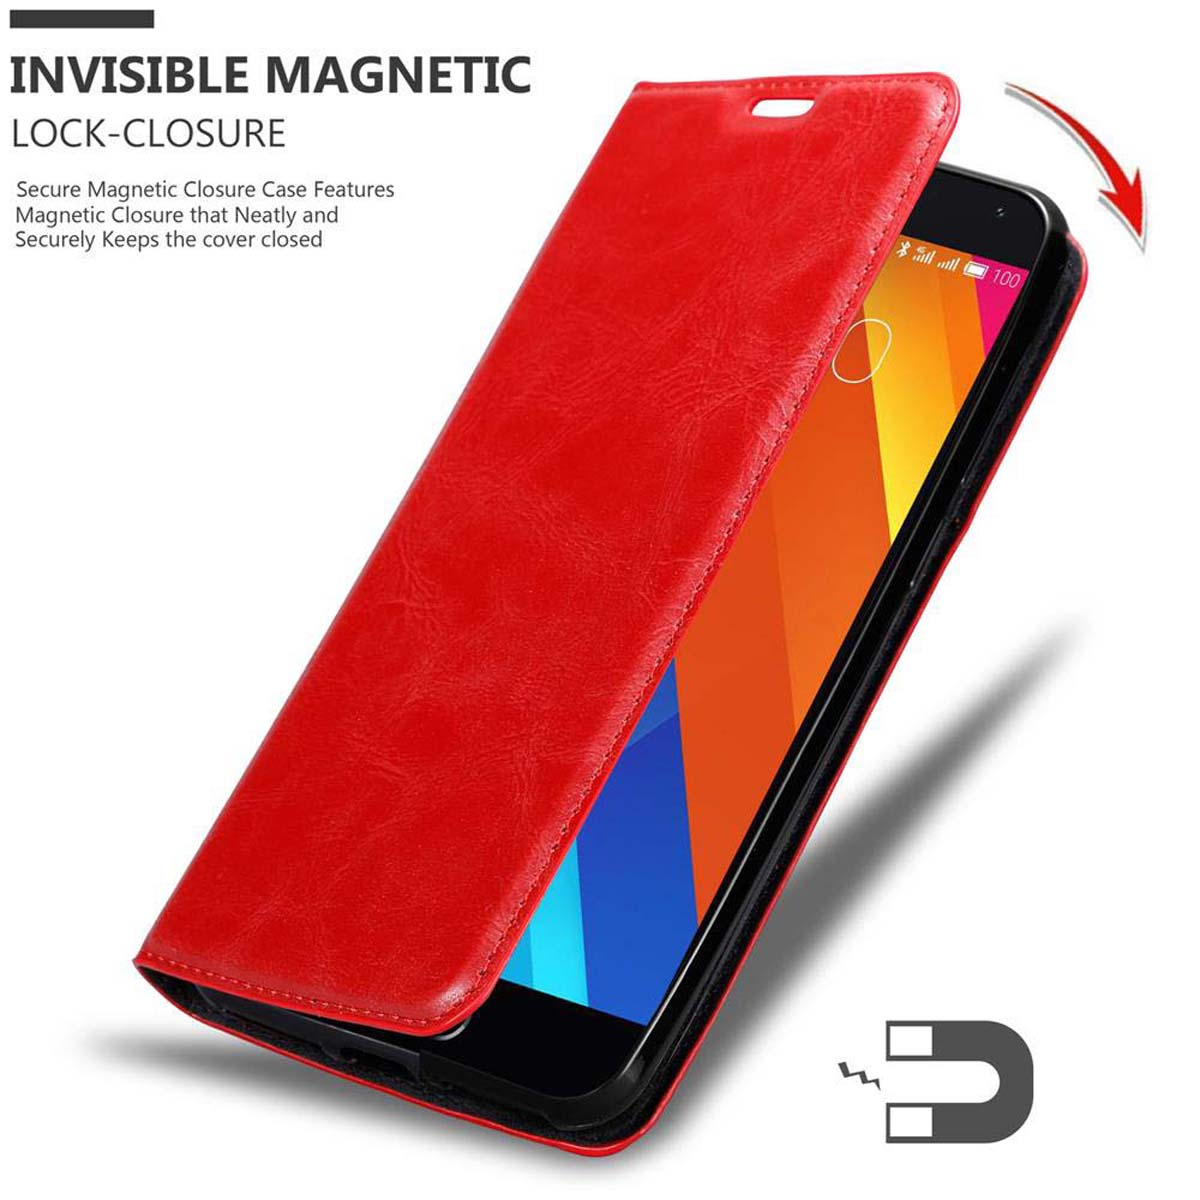 MEIZU, MX5, Invisible APFEL Magnet, Book Hülle CADORABO Bookcover, ROT